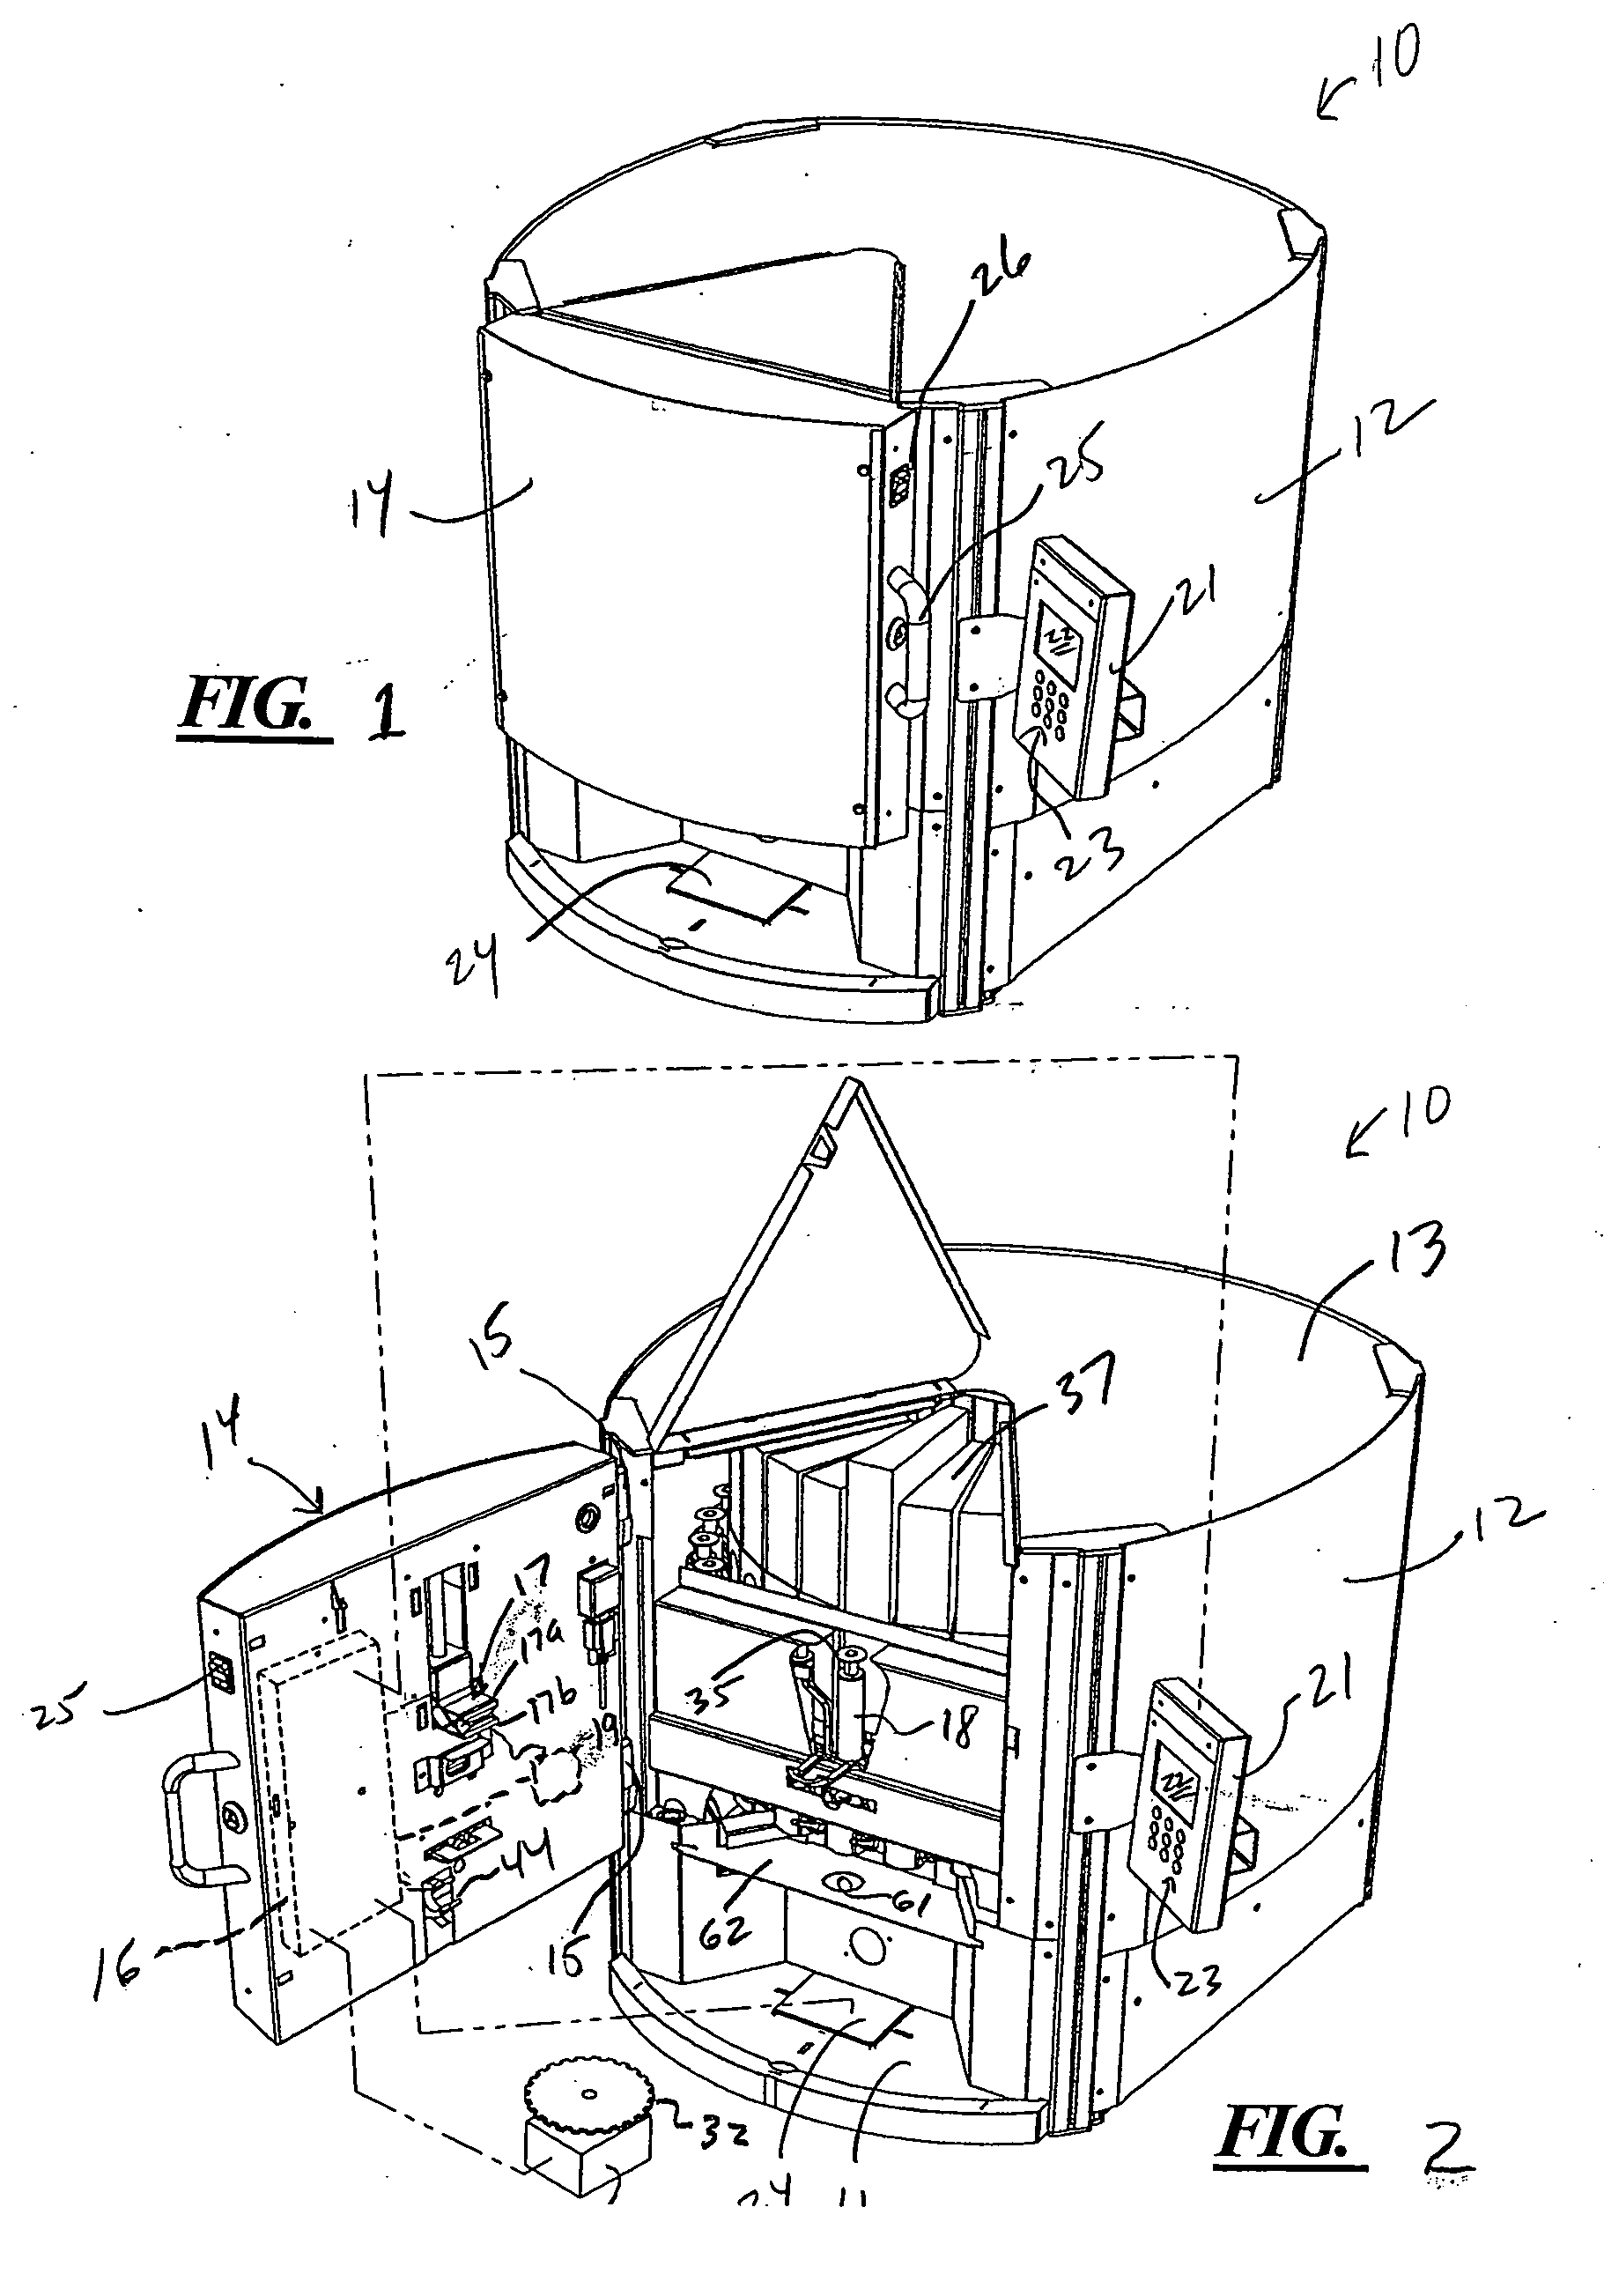 Apparatuses for dispensing materials volumetrically and gravimetrically based on a stored formula and methods of dispensing formulas using the same